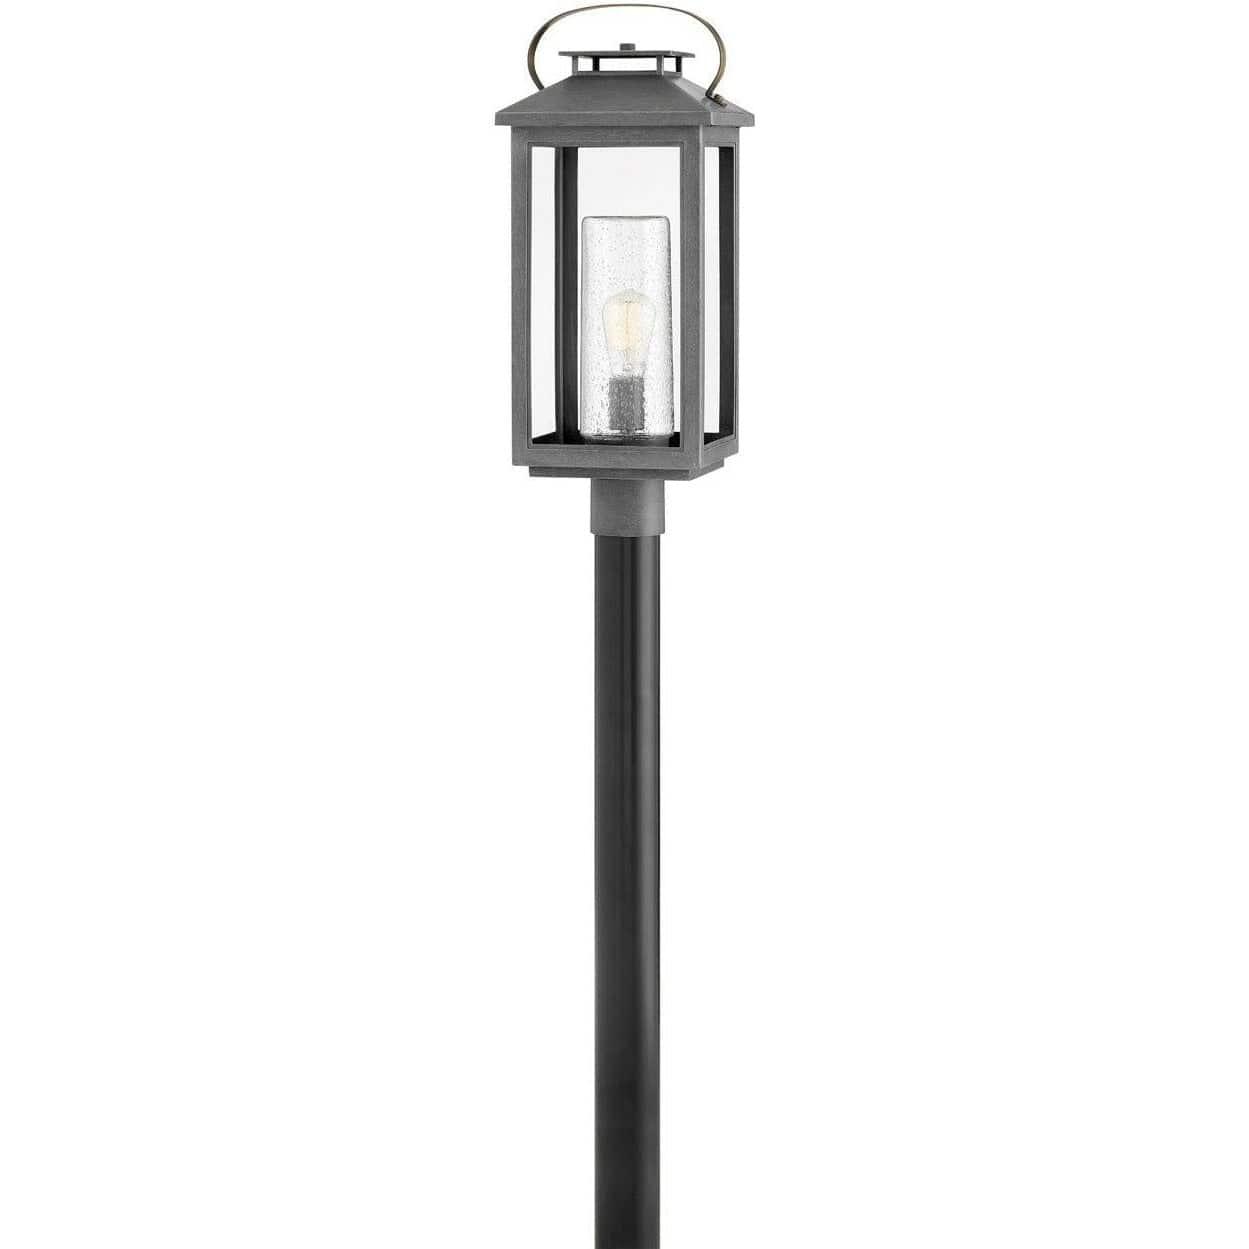 Hinkley Lighting - Atwater LED Post Top or Pier Mount - 1161AH-LL | Montreal Lighting & Hardware